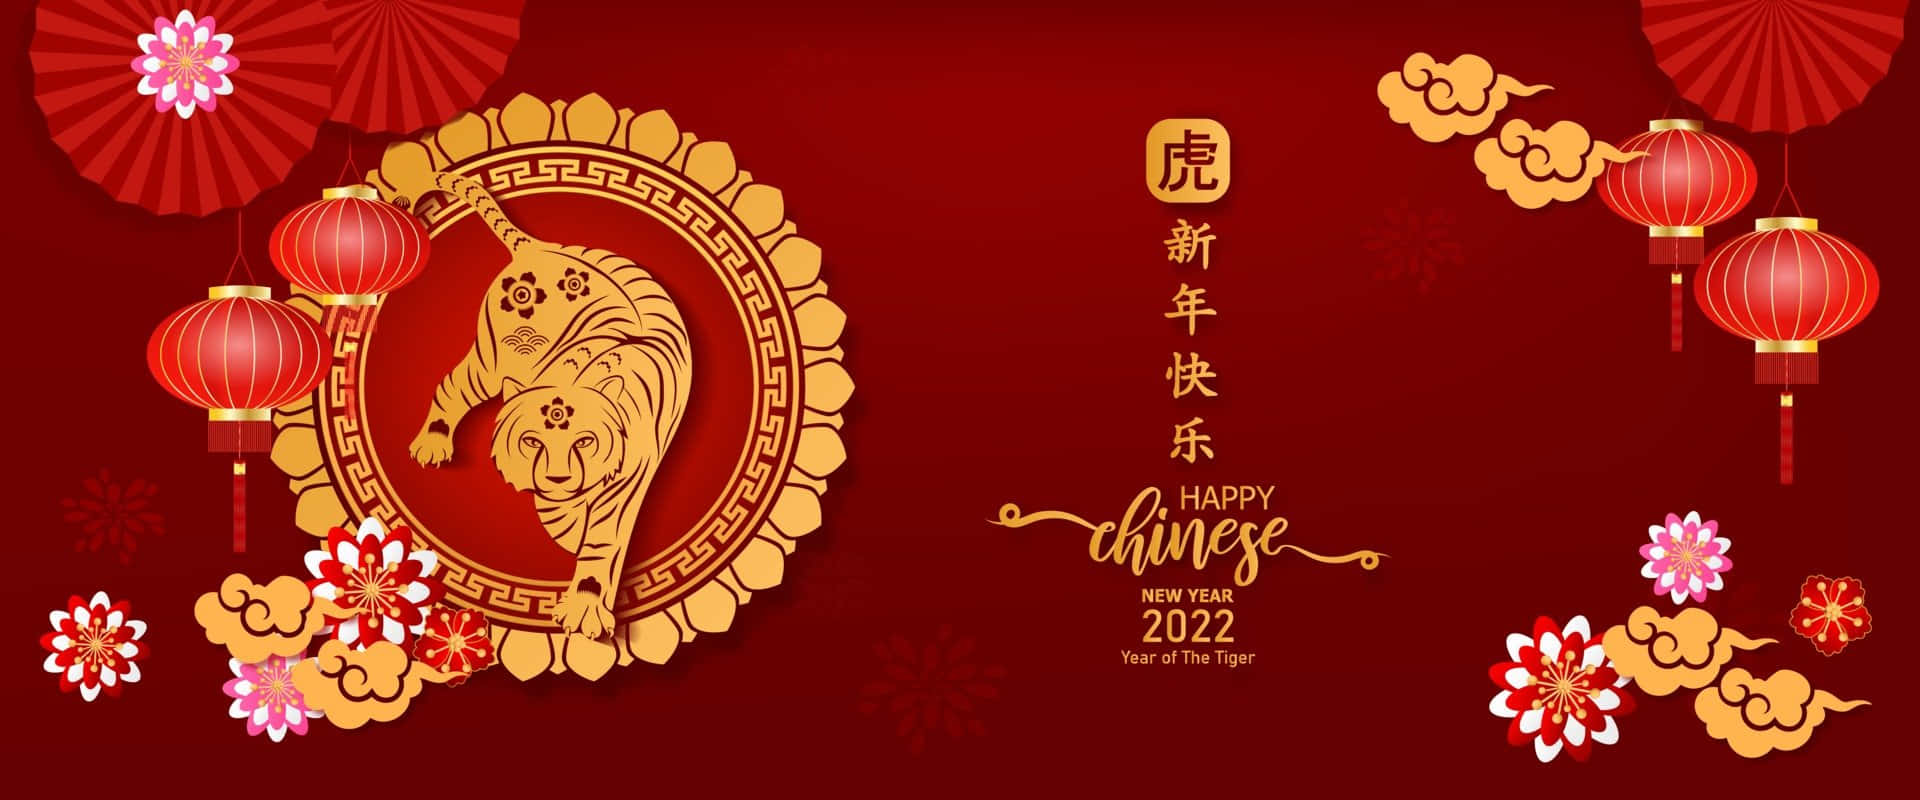 Chinese New Year 2022 Pictures Wallpaper